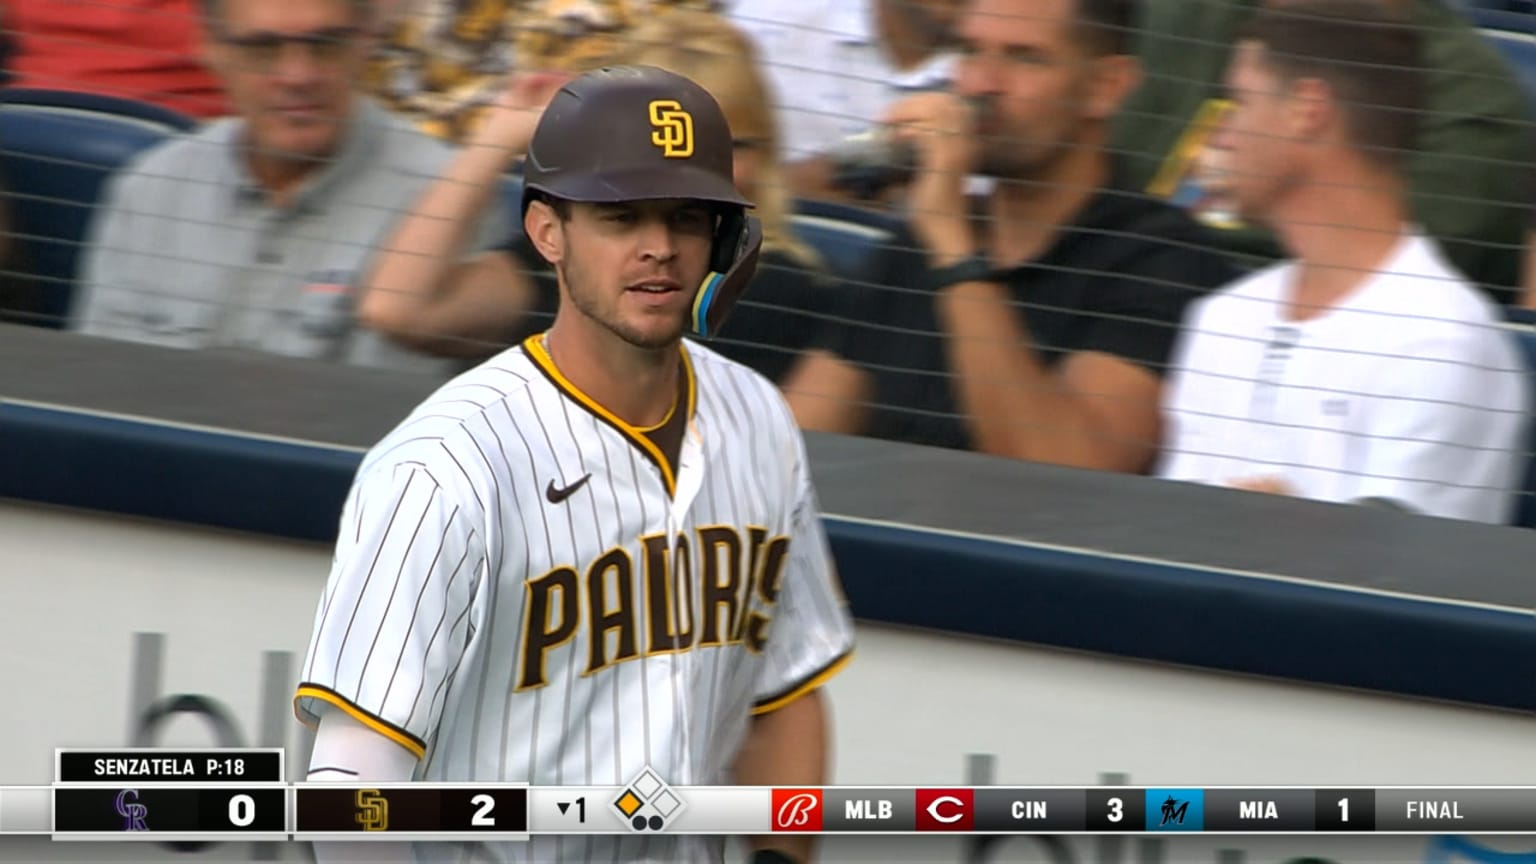 Wil Myers' foul catch in the stands resulted in the cutest